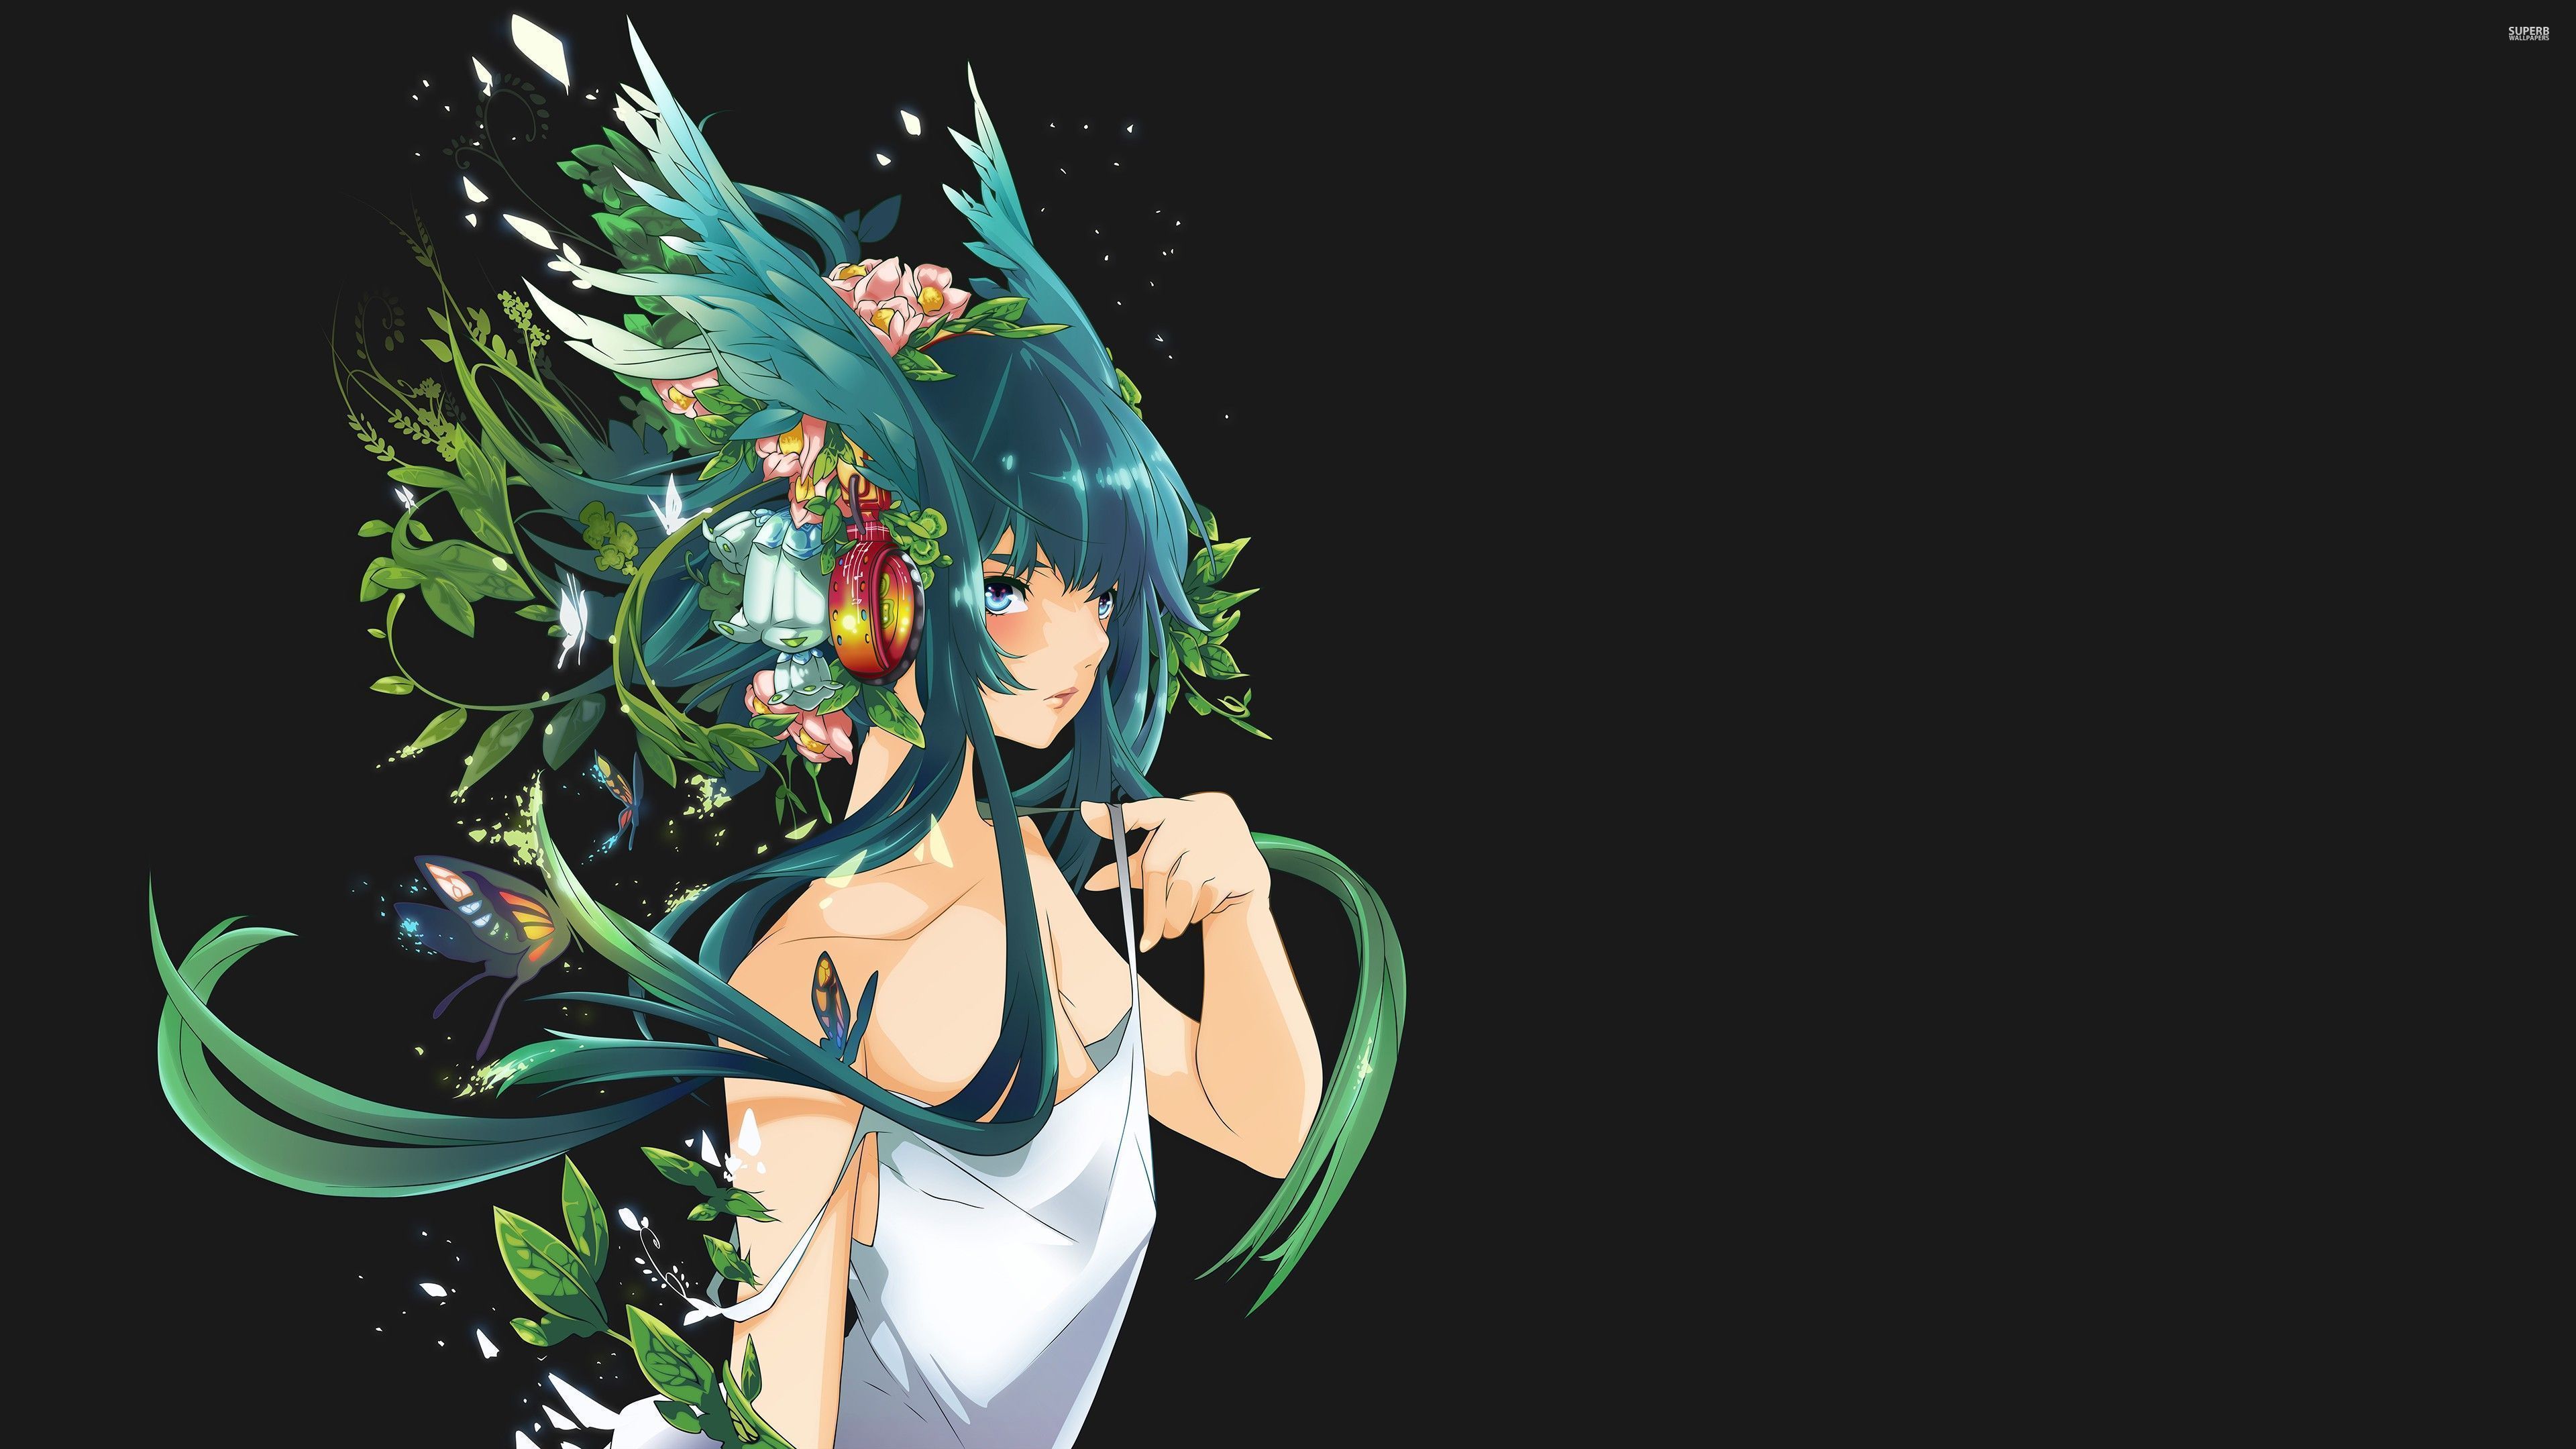 Girl with headphones and flowers in her hair wallpaper - Anime ...